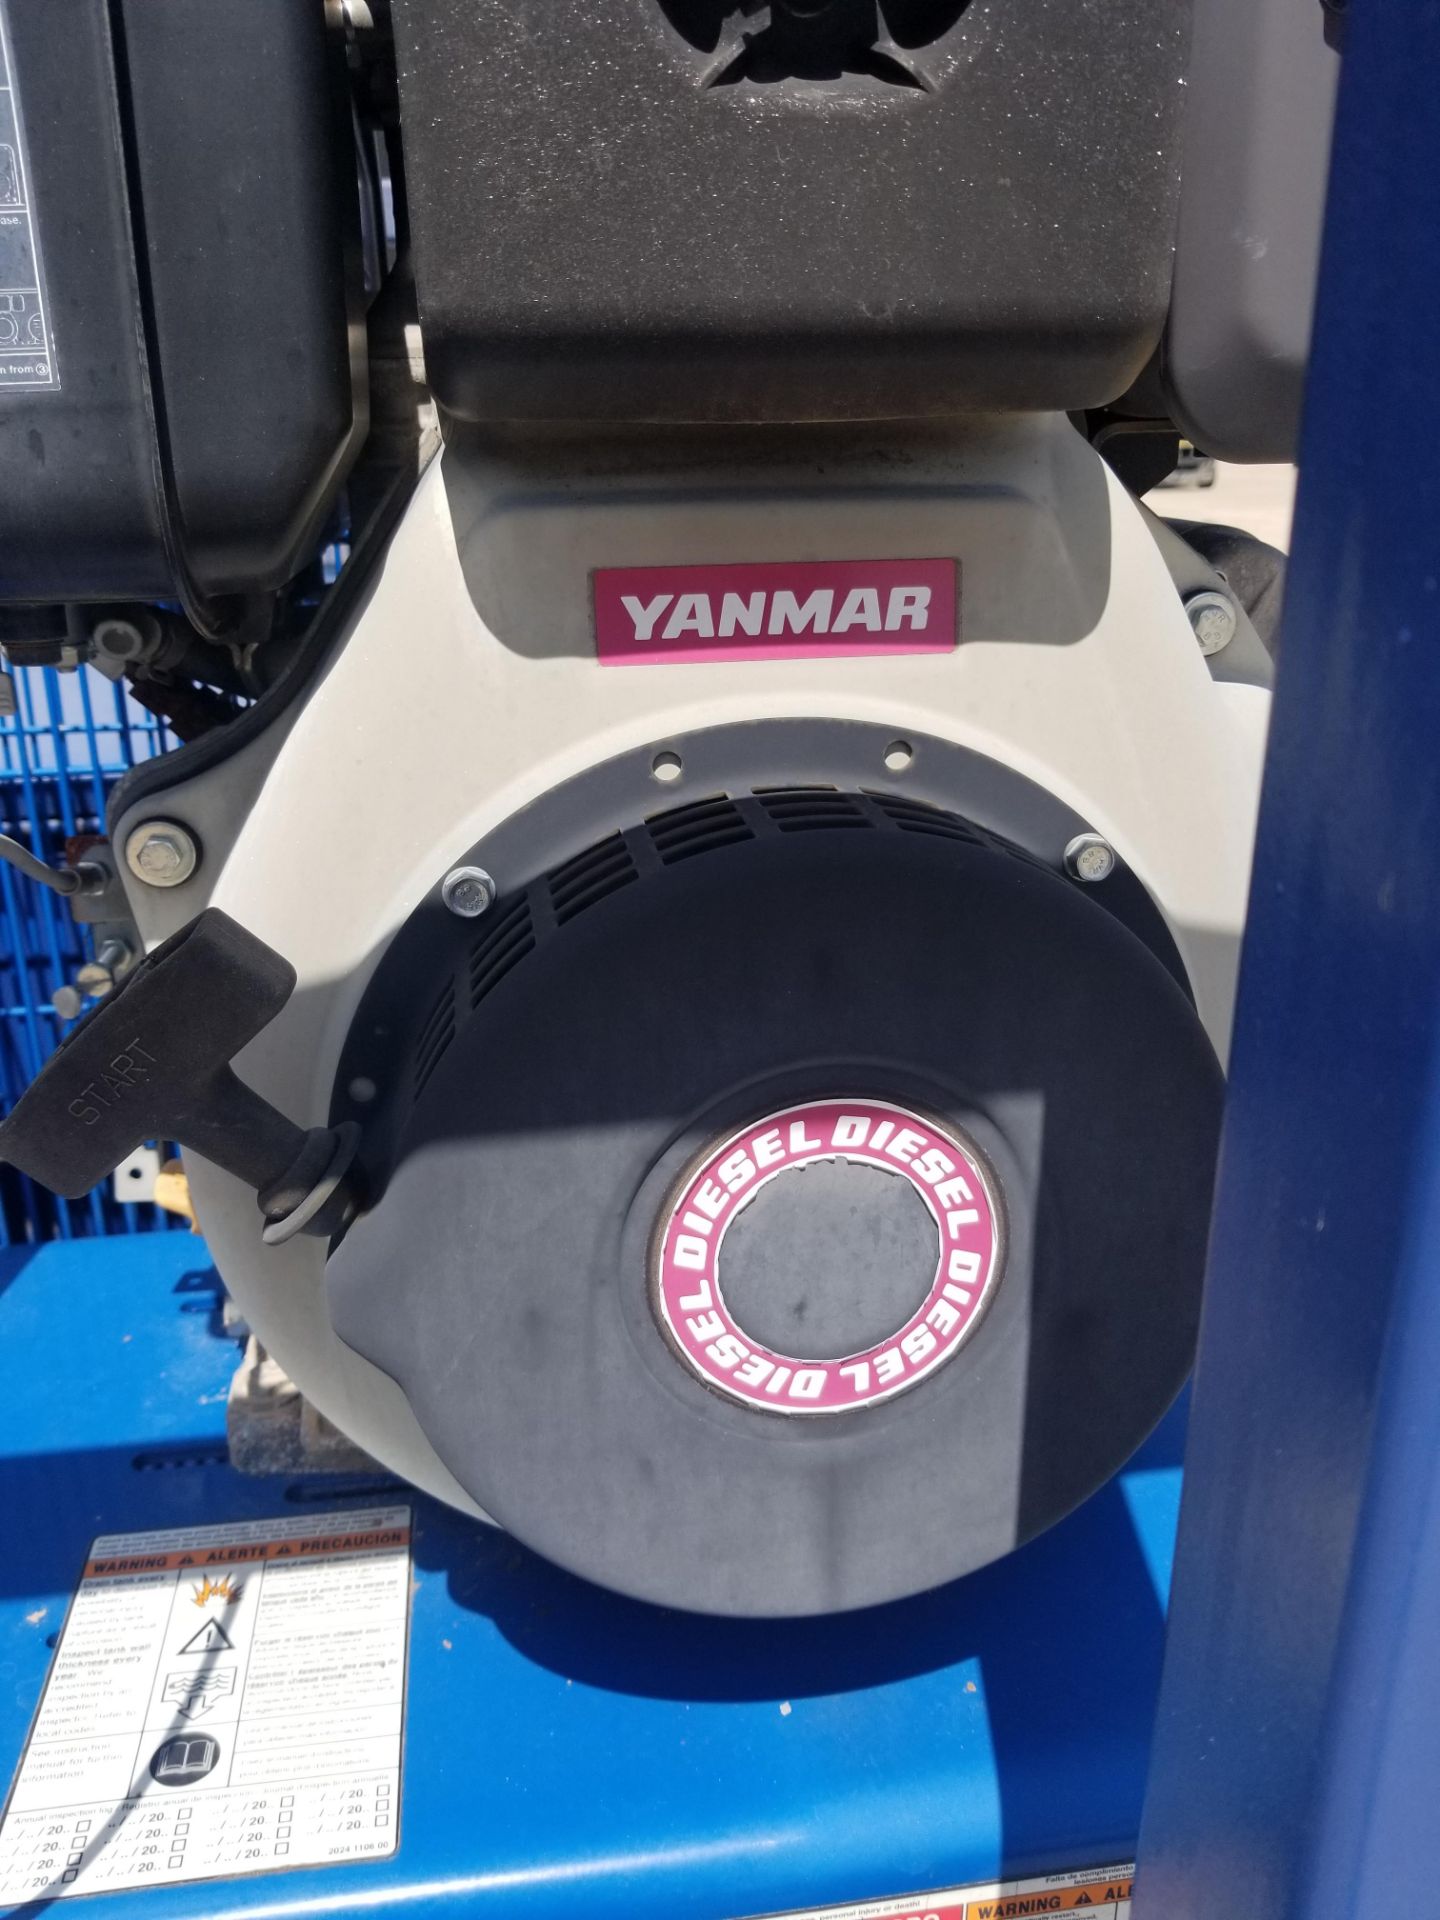 Ball Dropper Unit – 10hp Yanmar Engine on Quincy Compressor - Image 3 of 4